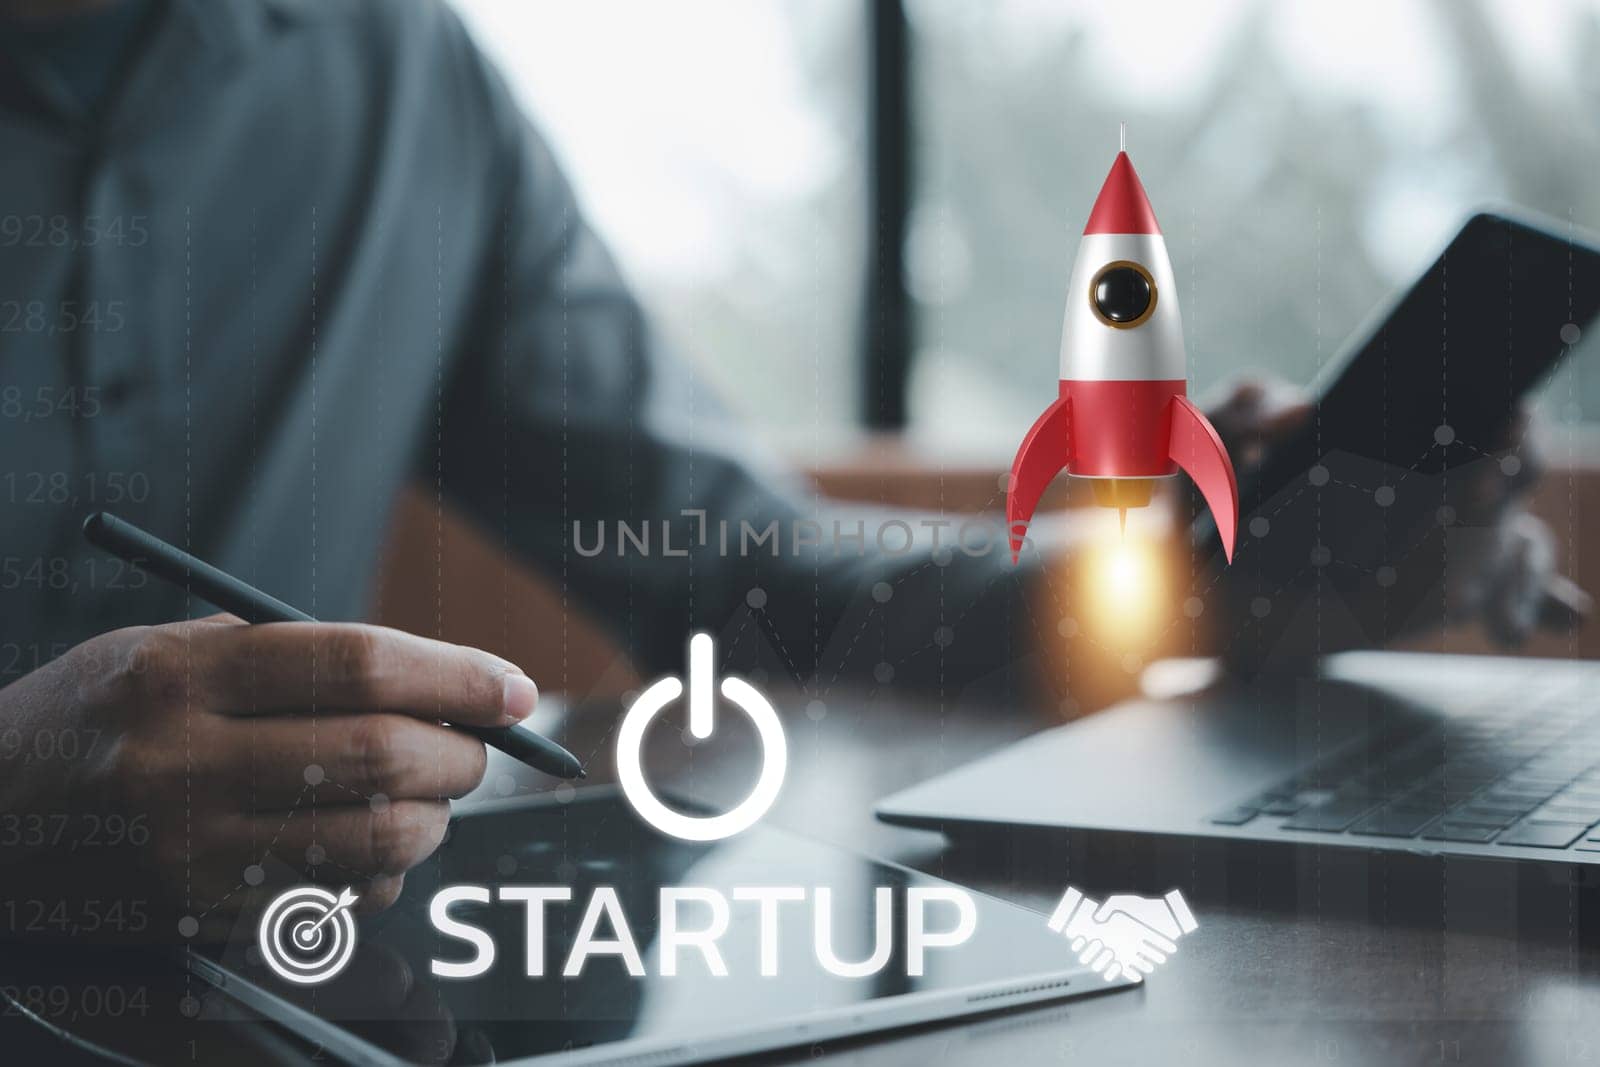 Business startup concept with a rocket icon launching from a laptop by Sorapop